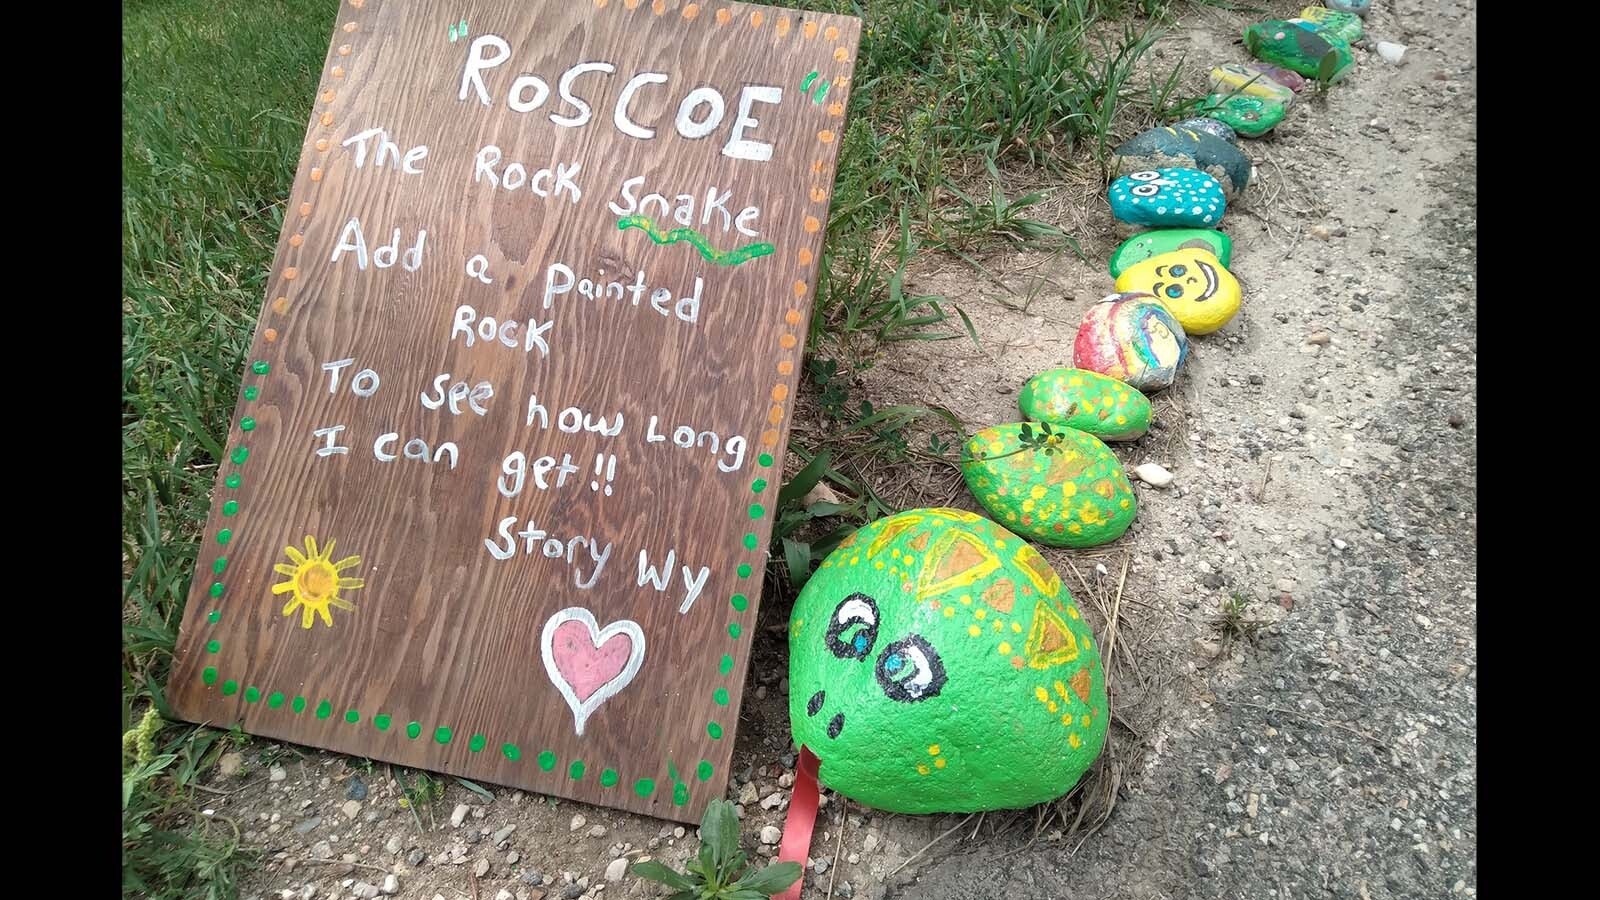 Roscoe the Rock Snake, currently growing in Story. Painted rocks can be found in many Wyoming communities, although they tend to be hidden in plain sight. "Rock snakes" are encouraged to grow in places where anyone can see and contribute to the somewhat spontaneous public art display.